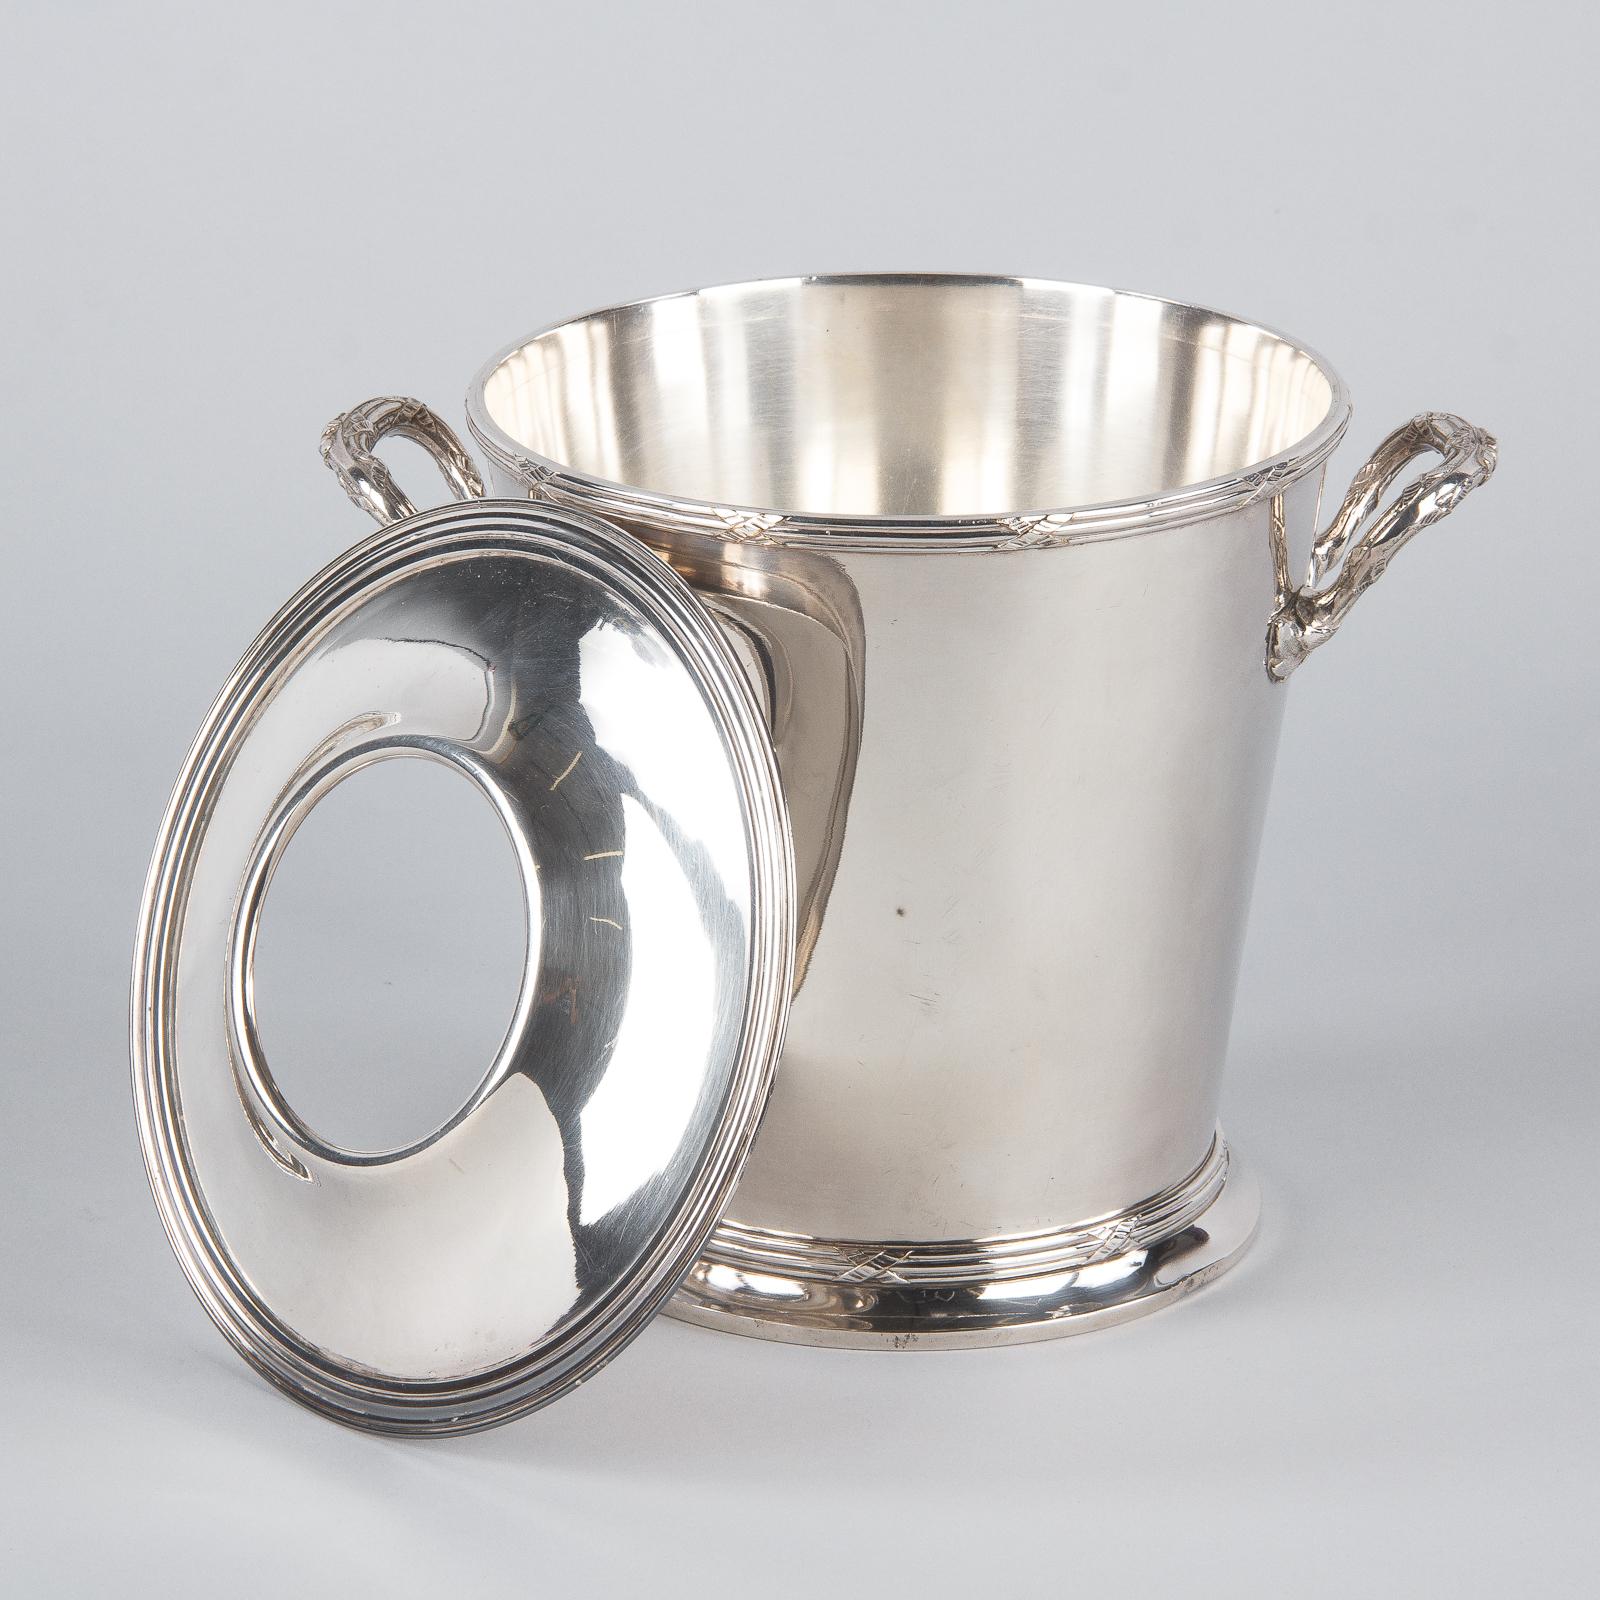 French Silver Metal Ice Bucket with Top by Saglier Freres, France, 1940s